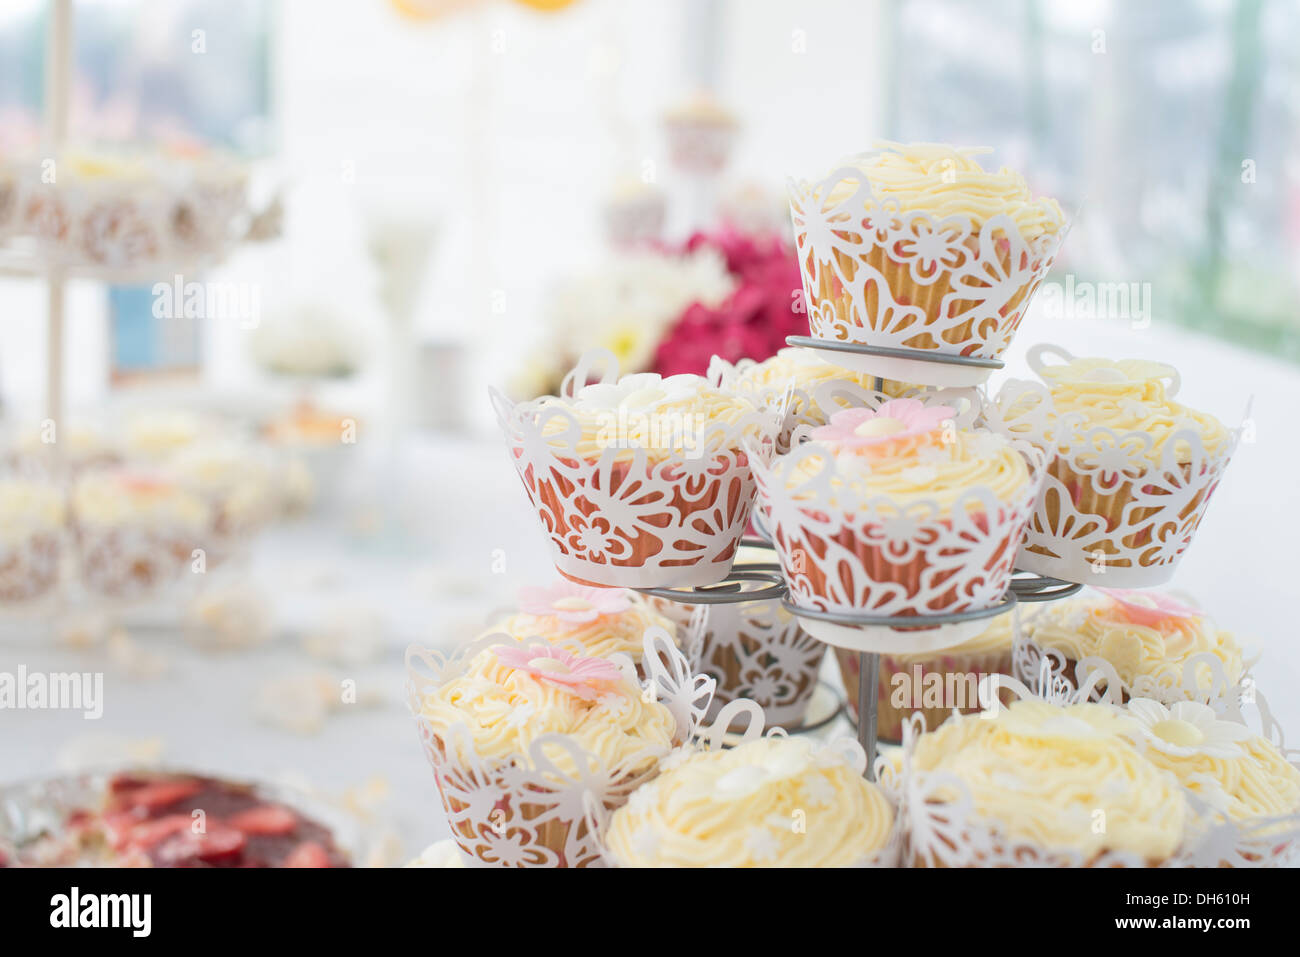 Fancy wrapped fairy cakes on cake stand with decorated tablecloth Stock Photo